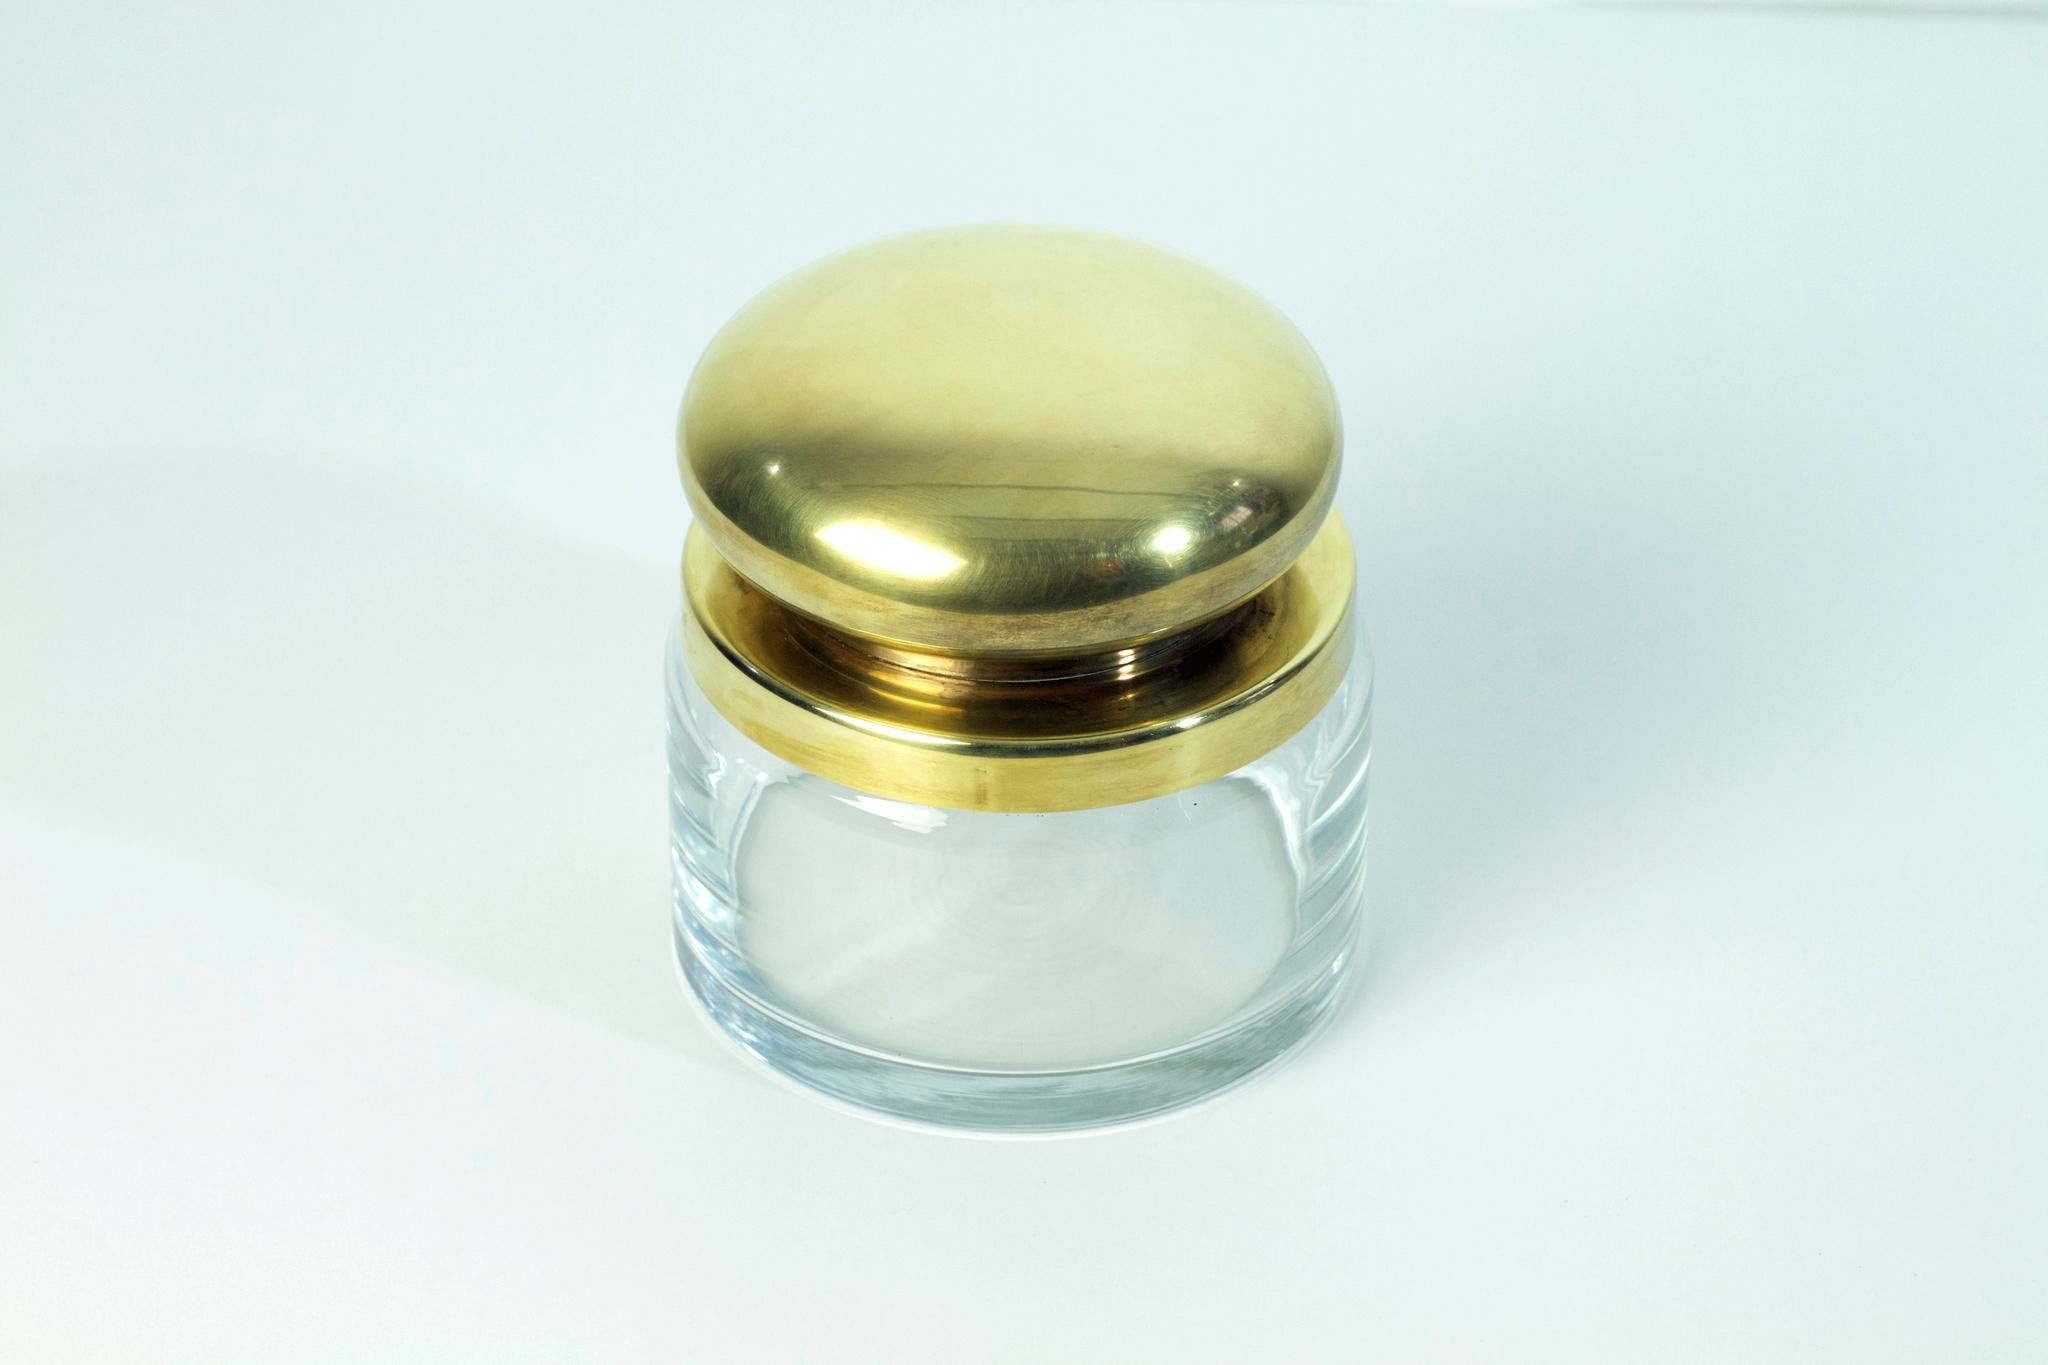 1970s handmade glass jar and brass lid perfect for any sorts of things in the bathroom, kitchen or coffee table.